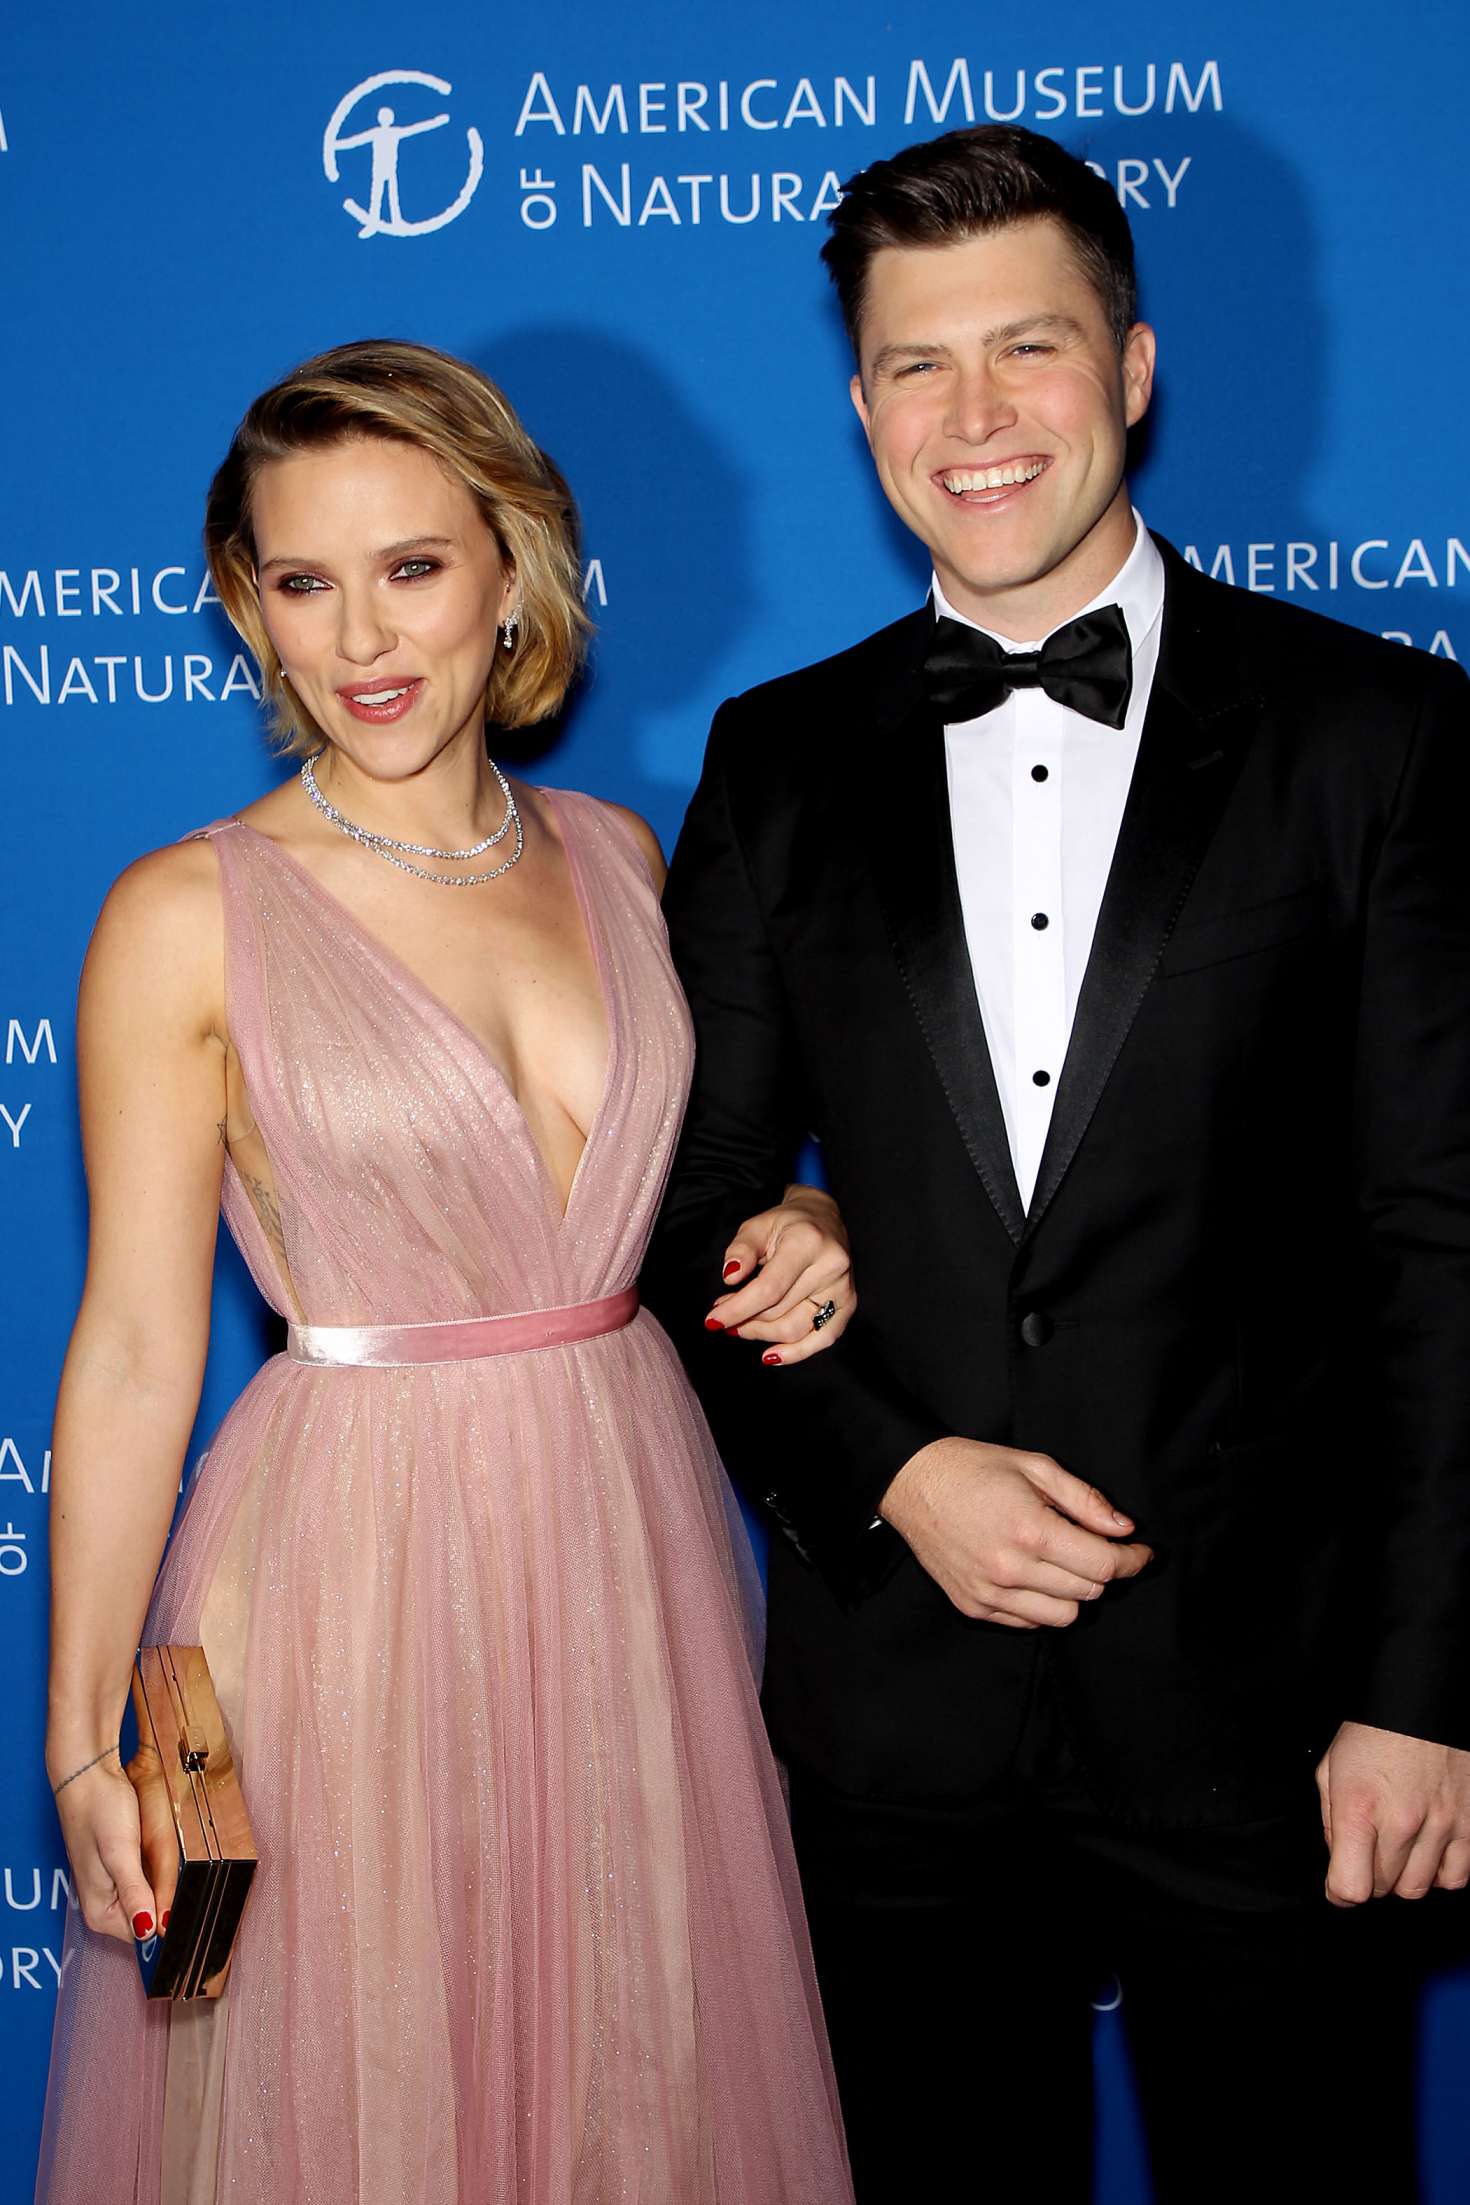 Scarlett Johansson â€“ 2018 American Museum of Natural History Gala in NYC